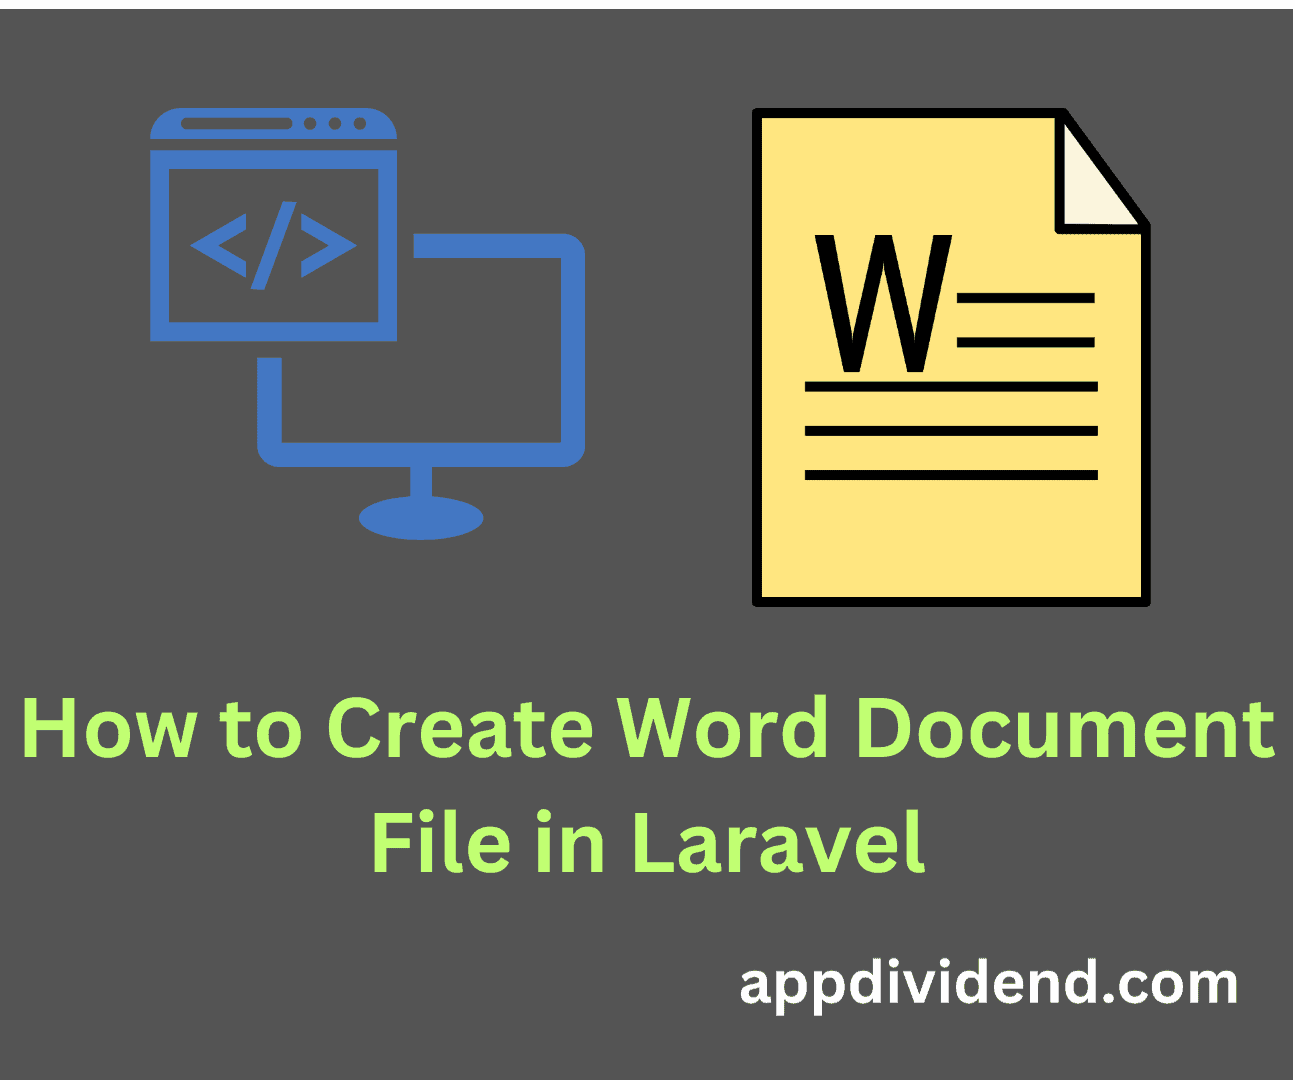 How to Create Word Document File in Laravel